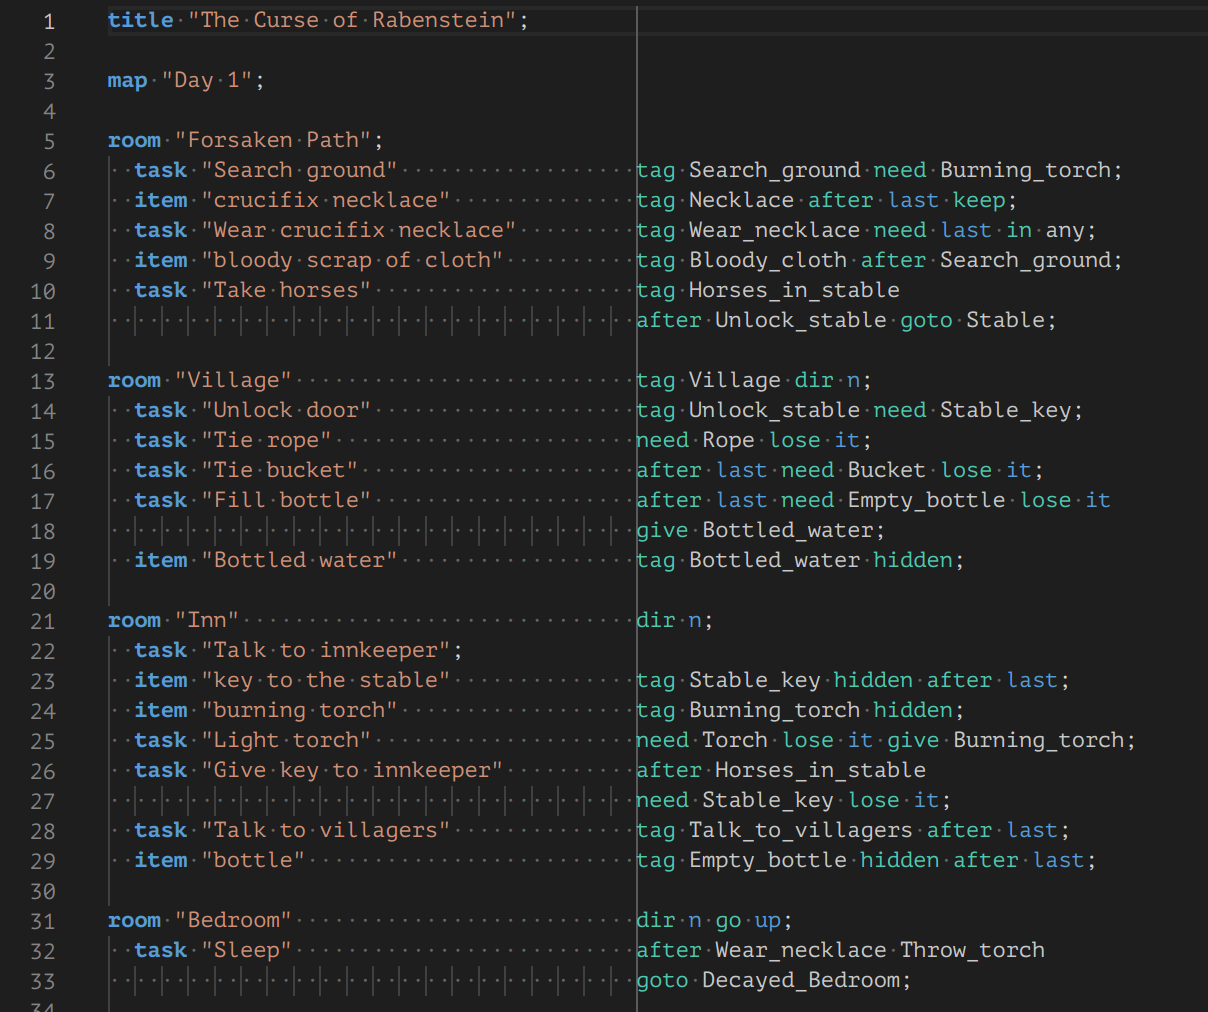 Screenshot of the IFM file _The Curse of Rabenstein_ opened in VS Code. It shows the first 32 lines of the file in order to showcase syntax highlighting.